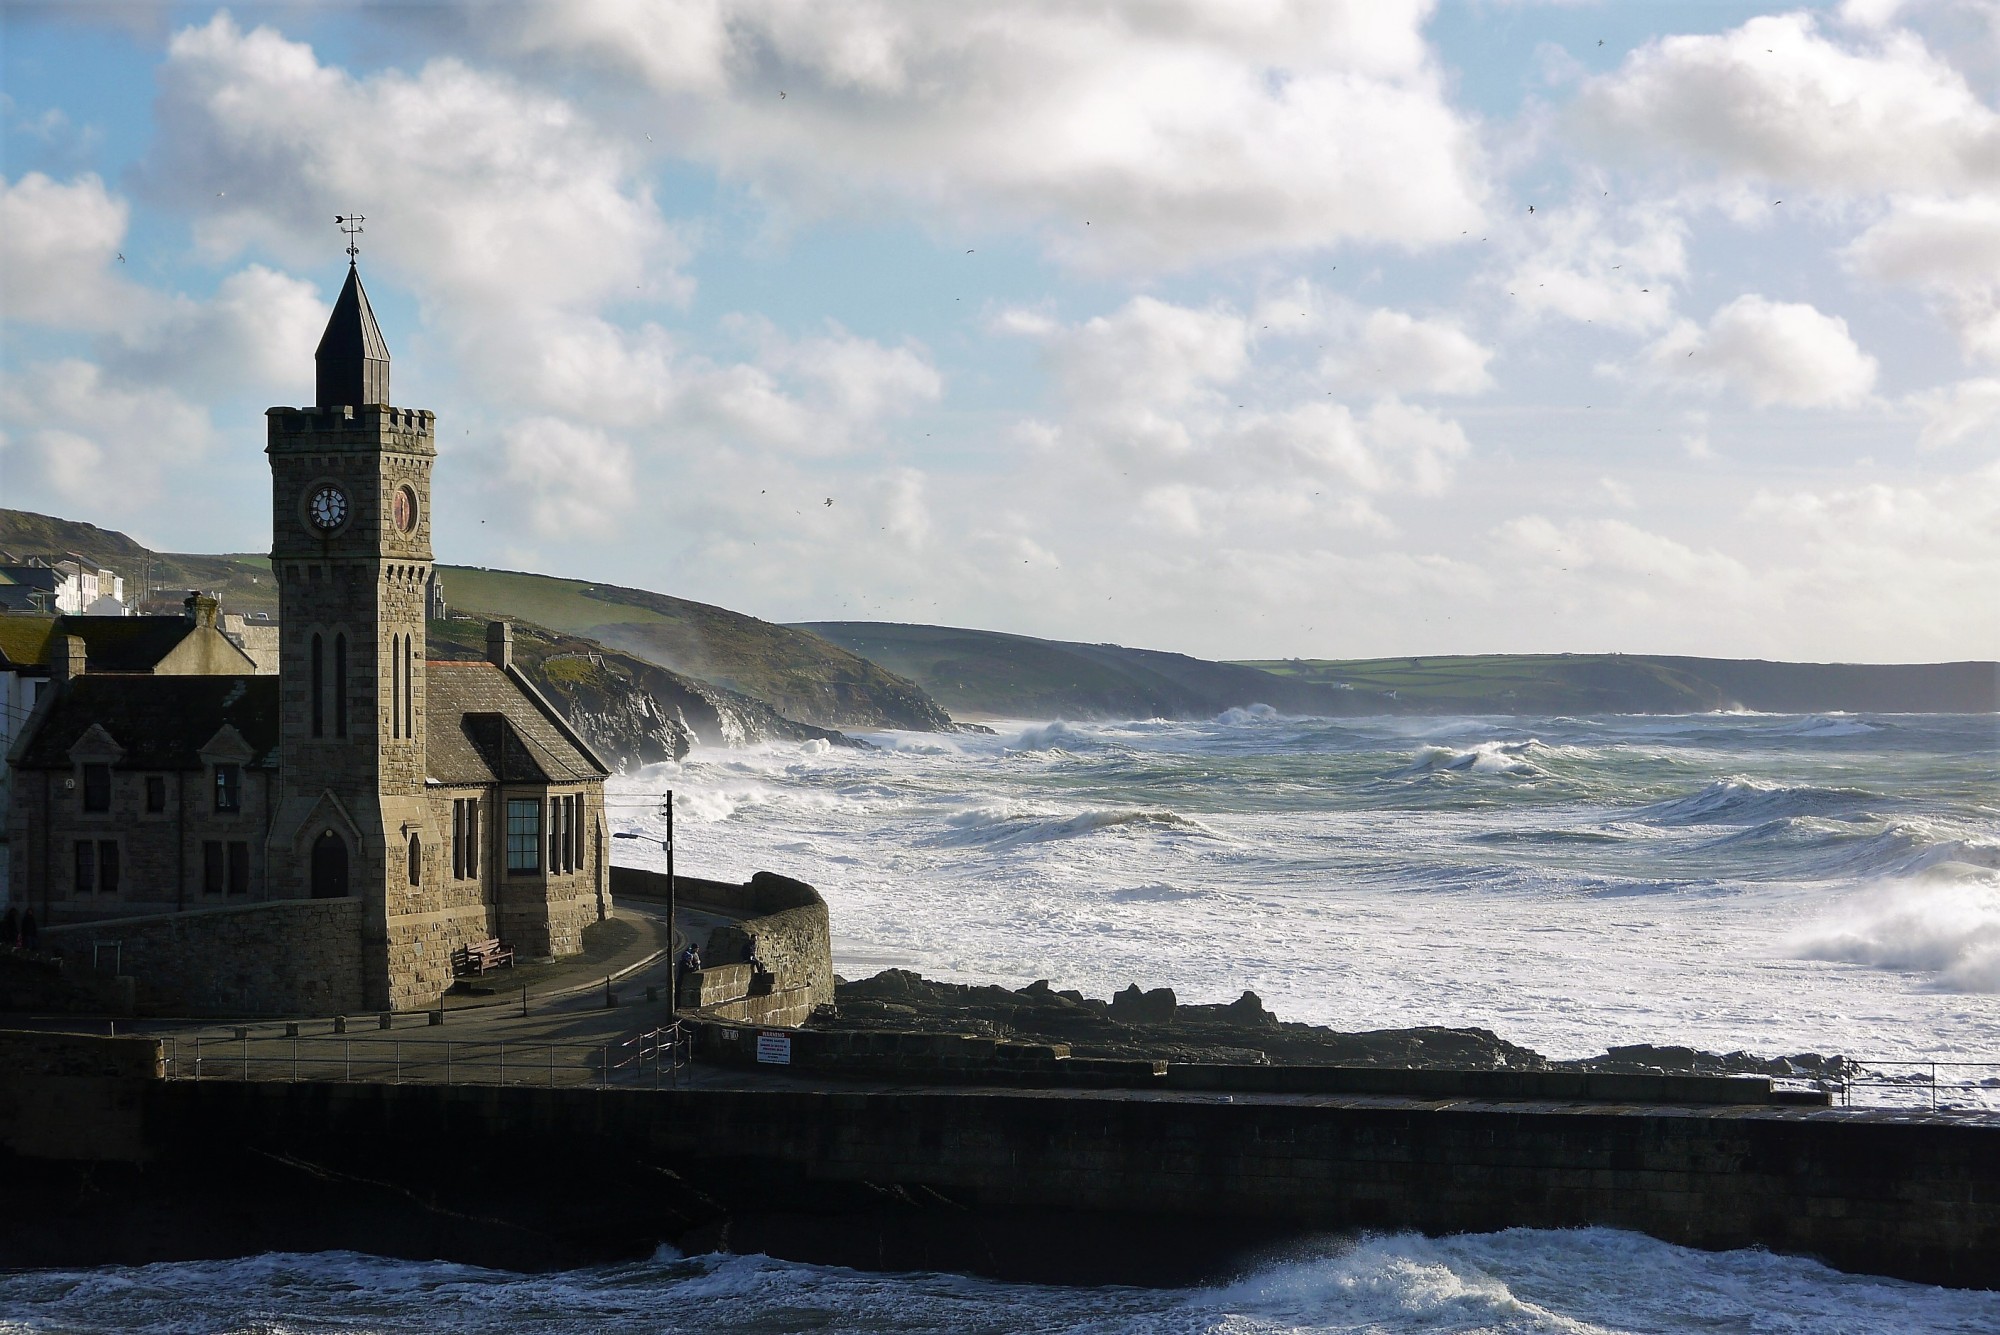 Porthleven clock tower in a storm